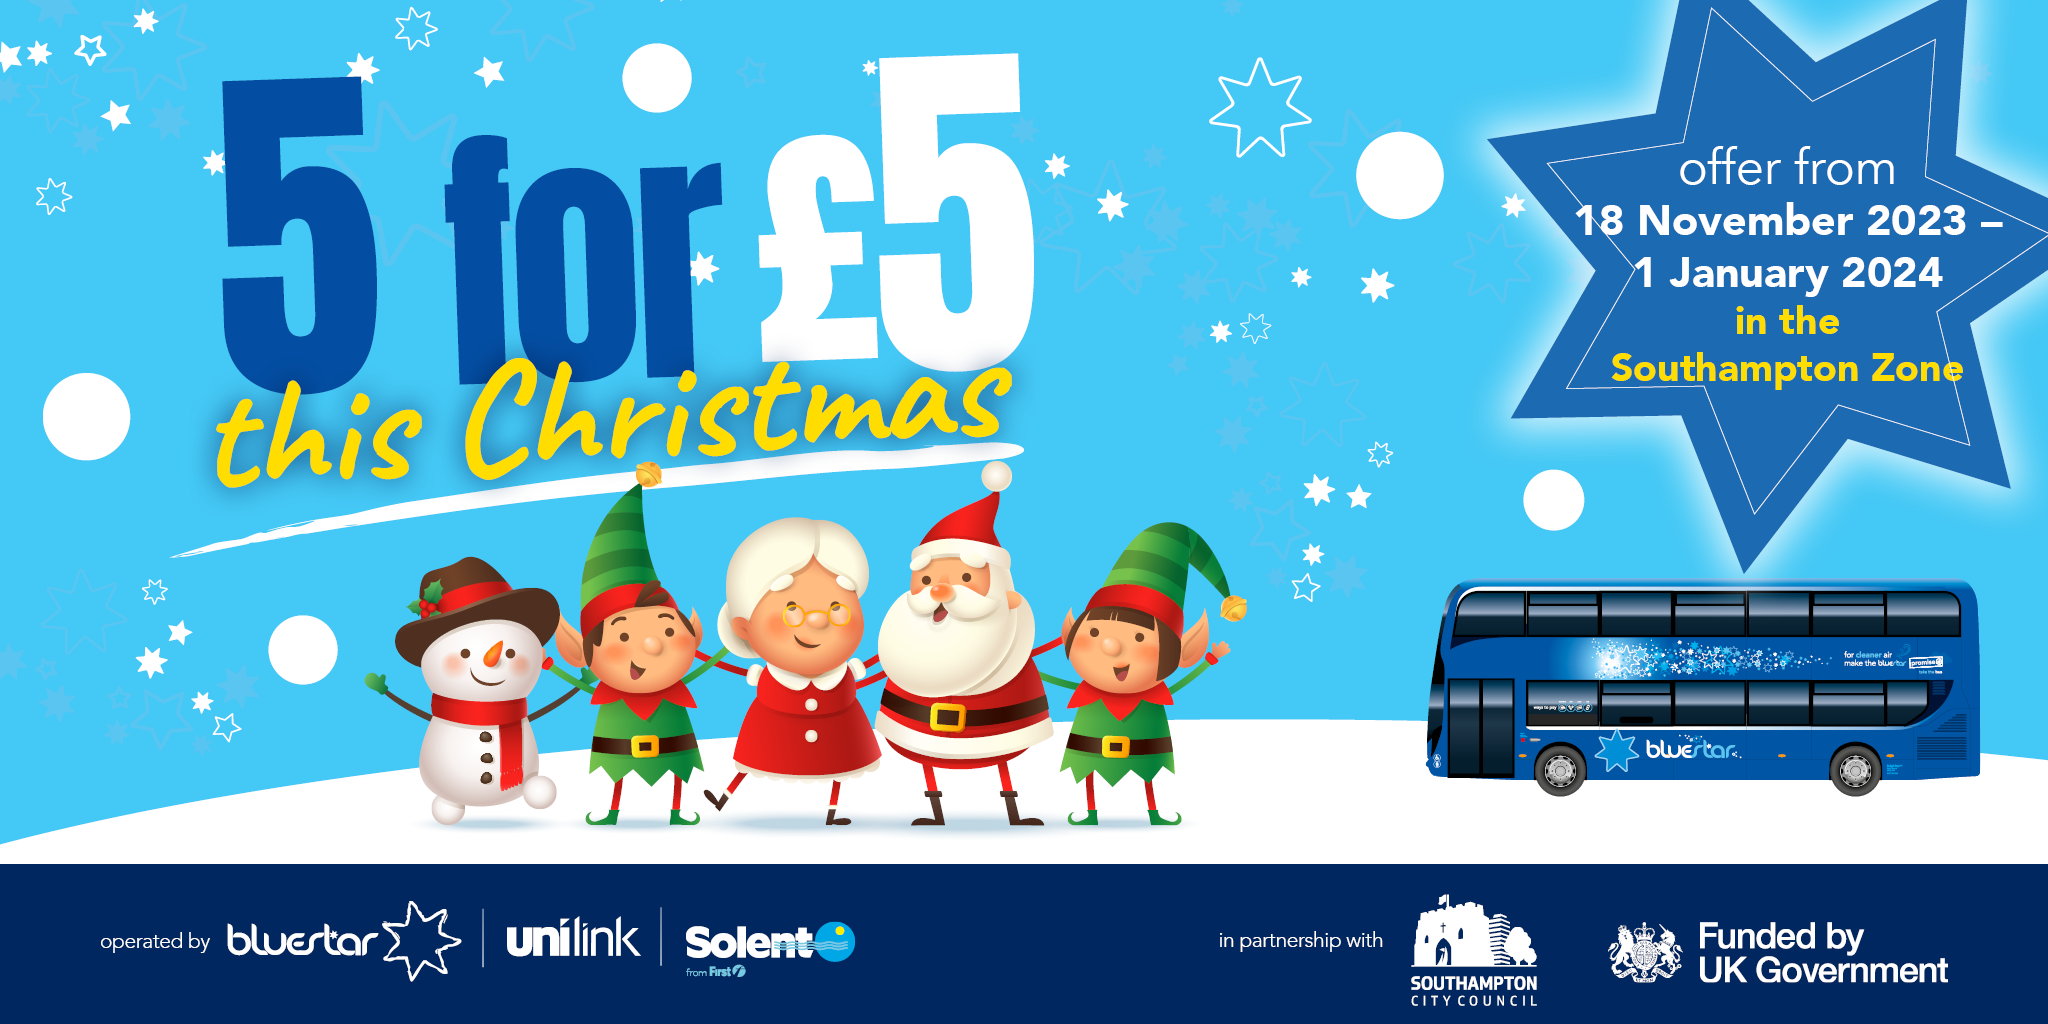 5 for £5 this Christmas, image with festive characters and a Bluestar bus